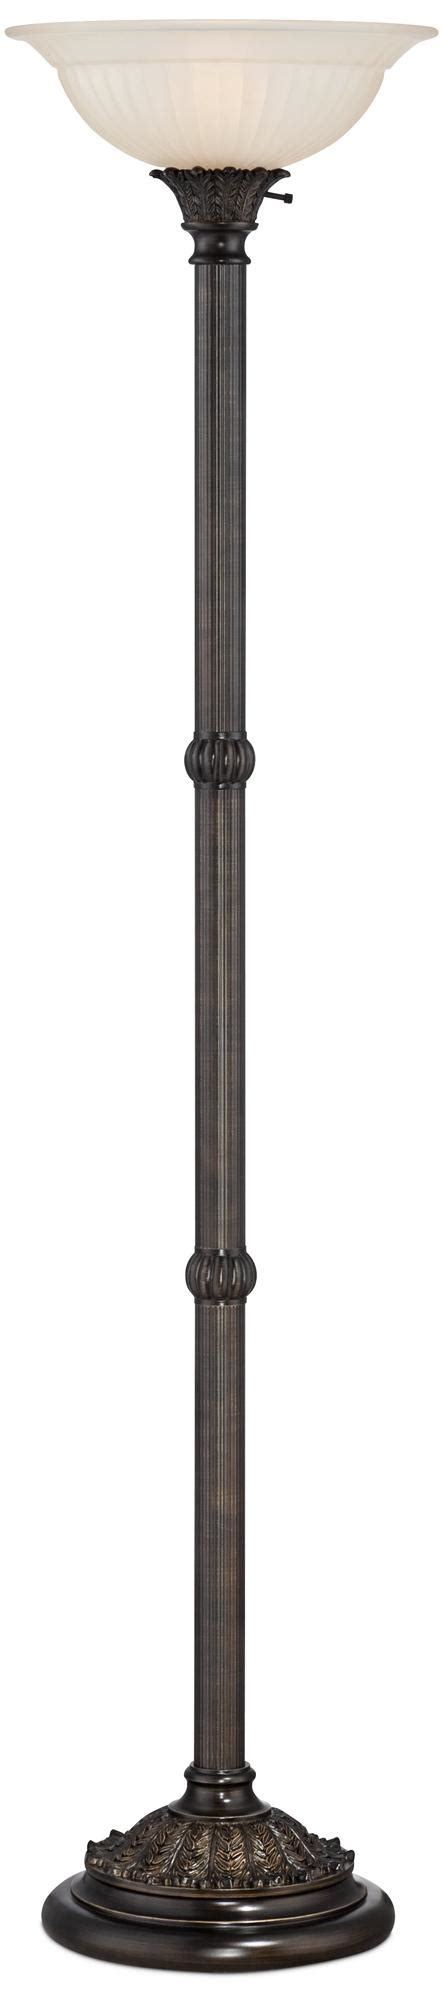 Bellham Bronze Traditional Torchiere Floor Lamp Style W9579